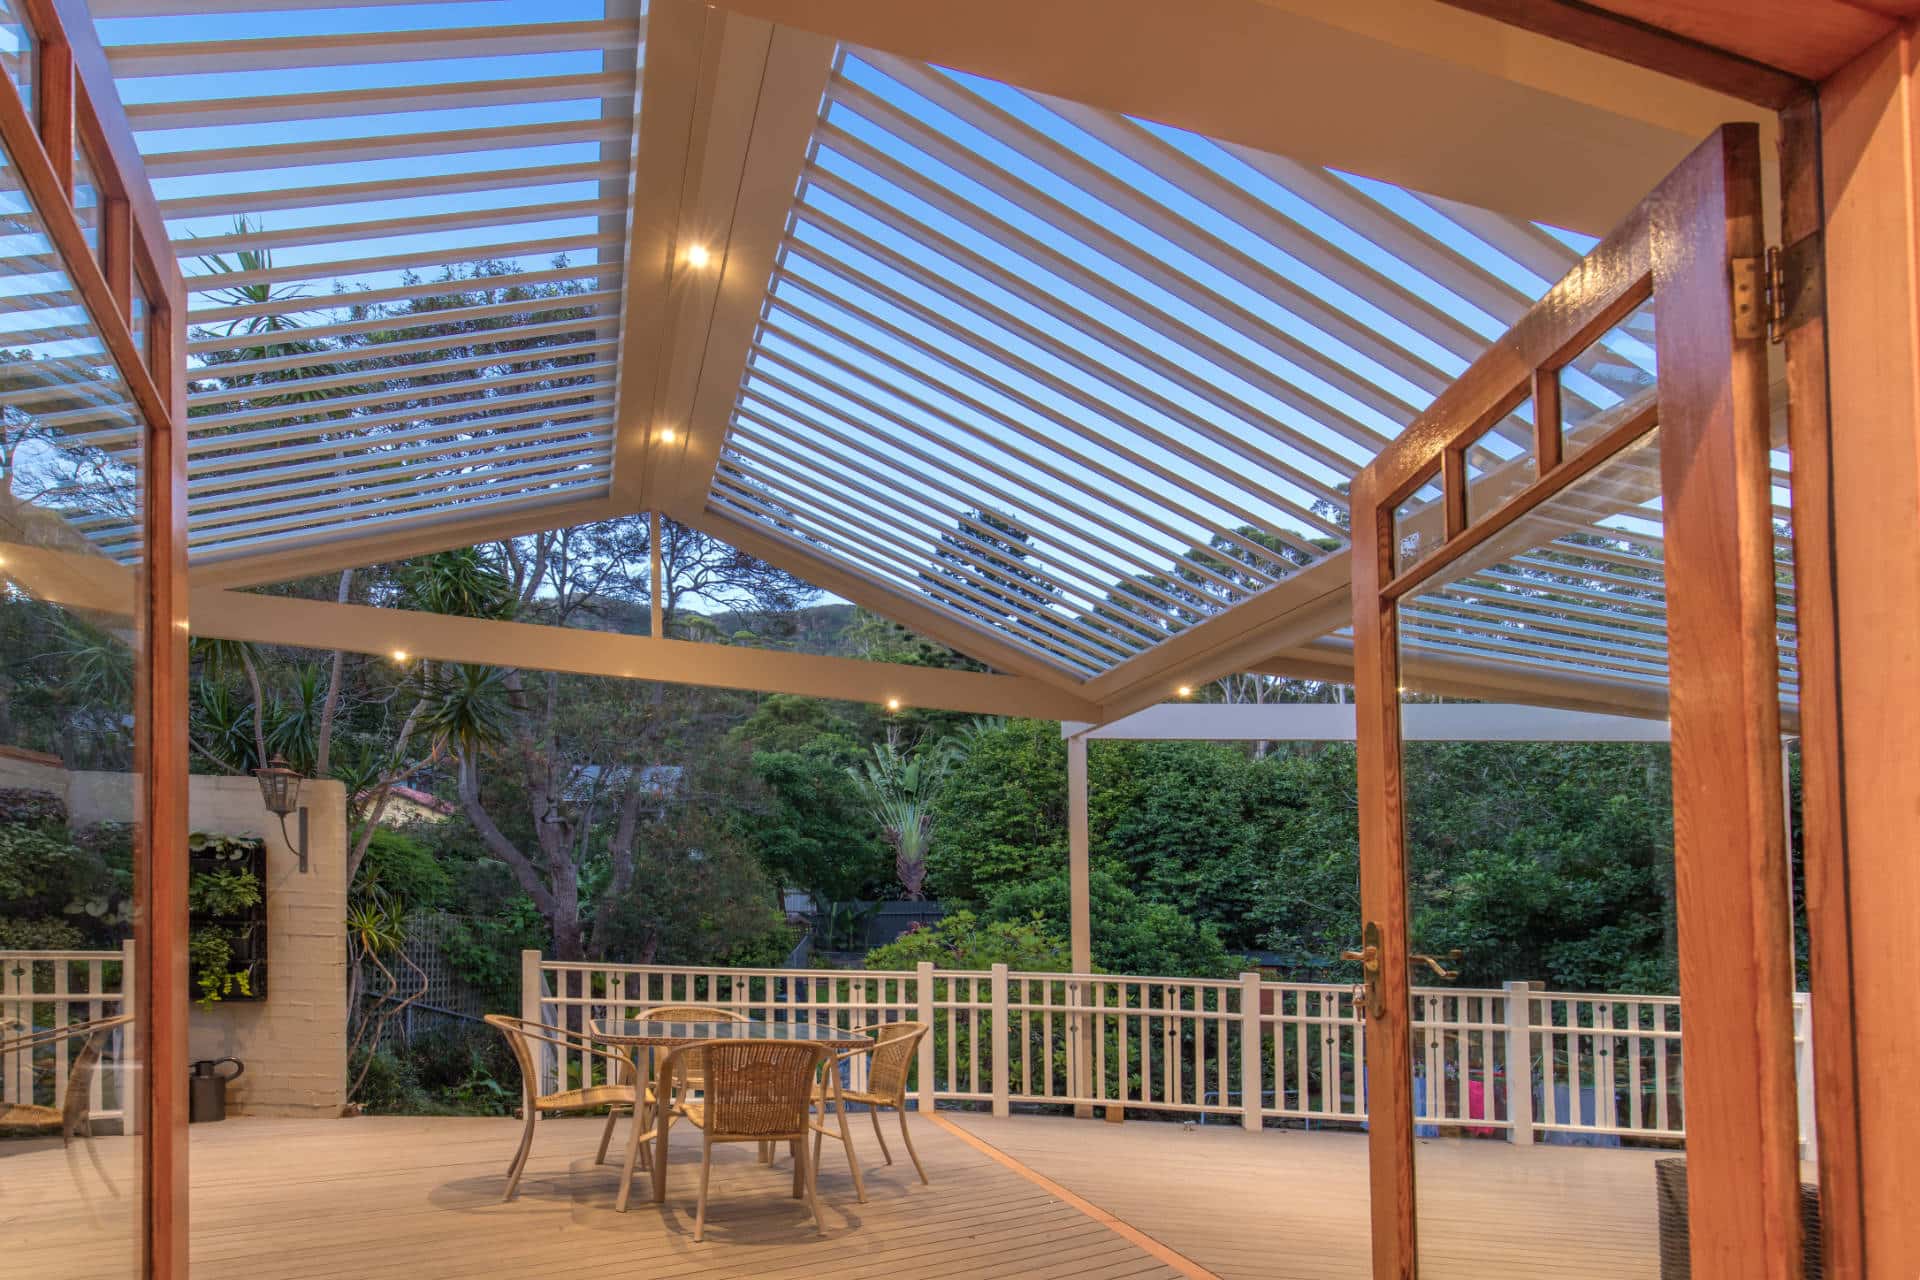 Austinmer pergola with open louvres at dusk.